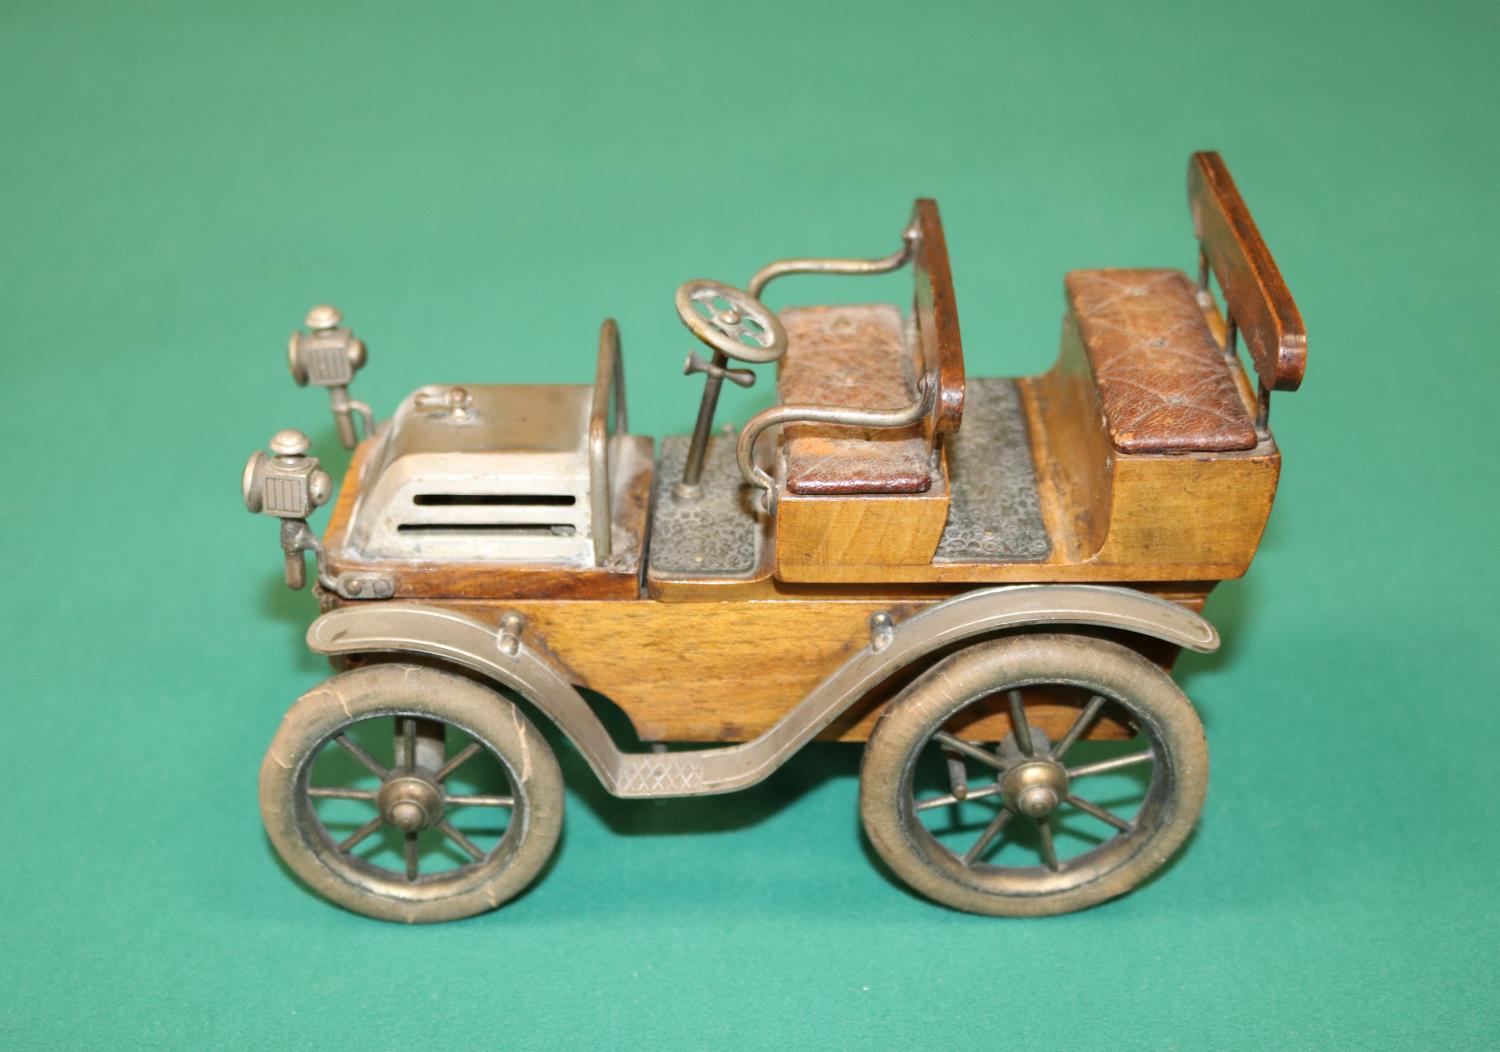 A rare Earnst Plank German Desk Display car for holding Cigarettes and matches, possibly dating from - Image 4 of 4